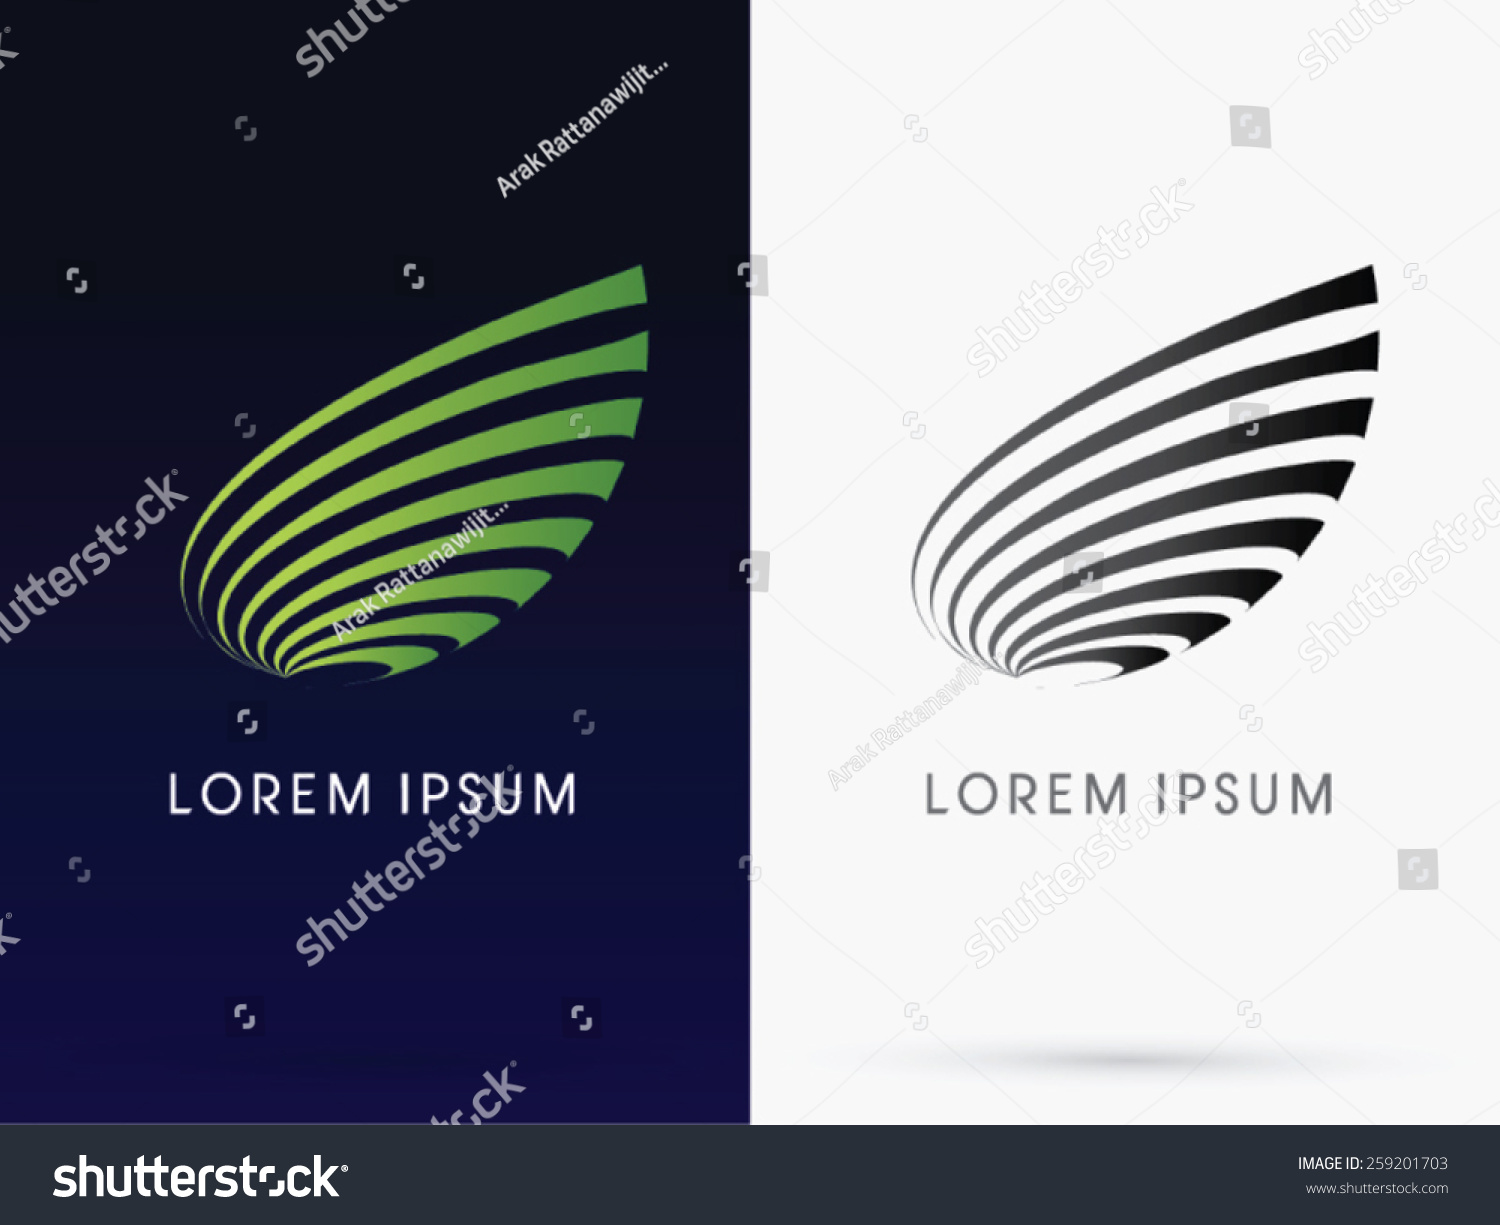 Abstract Leaf Designed Using Green Line Stock Vector (Royalty Free ...